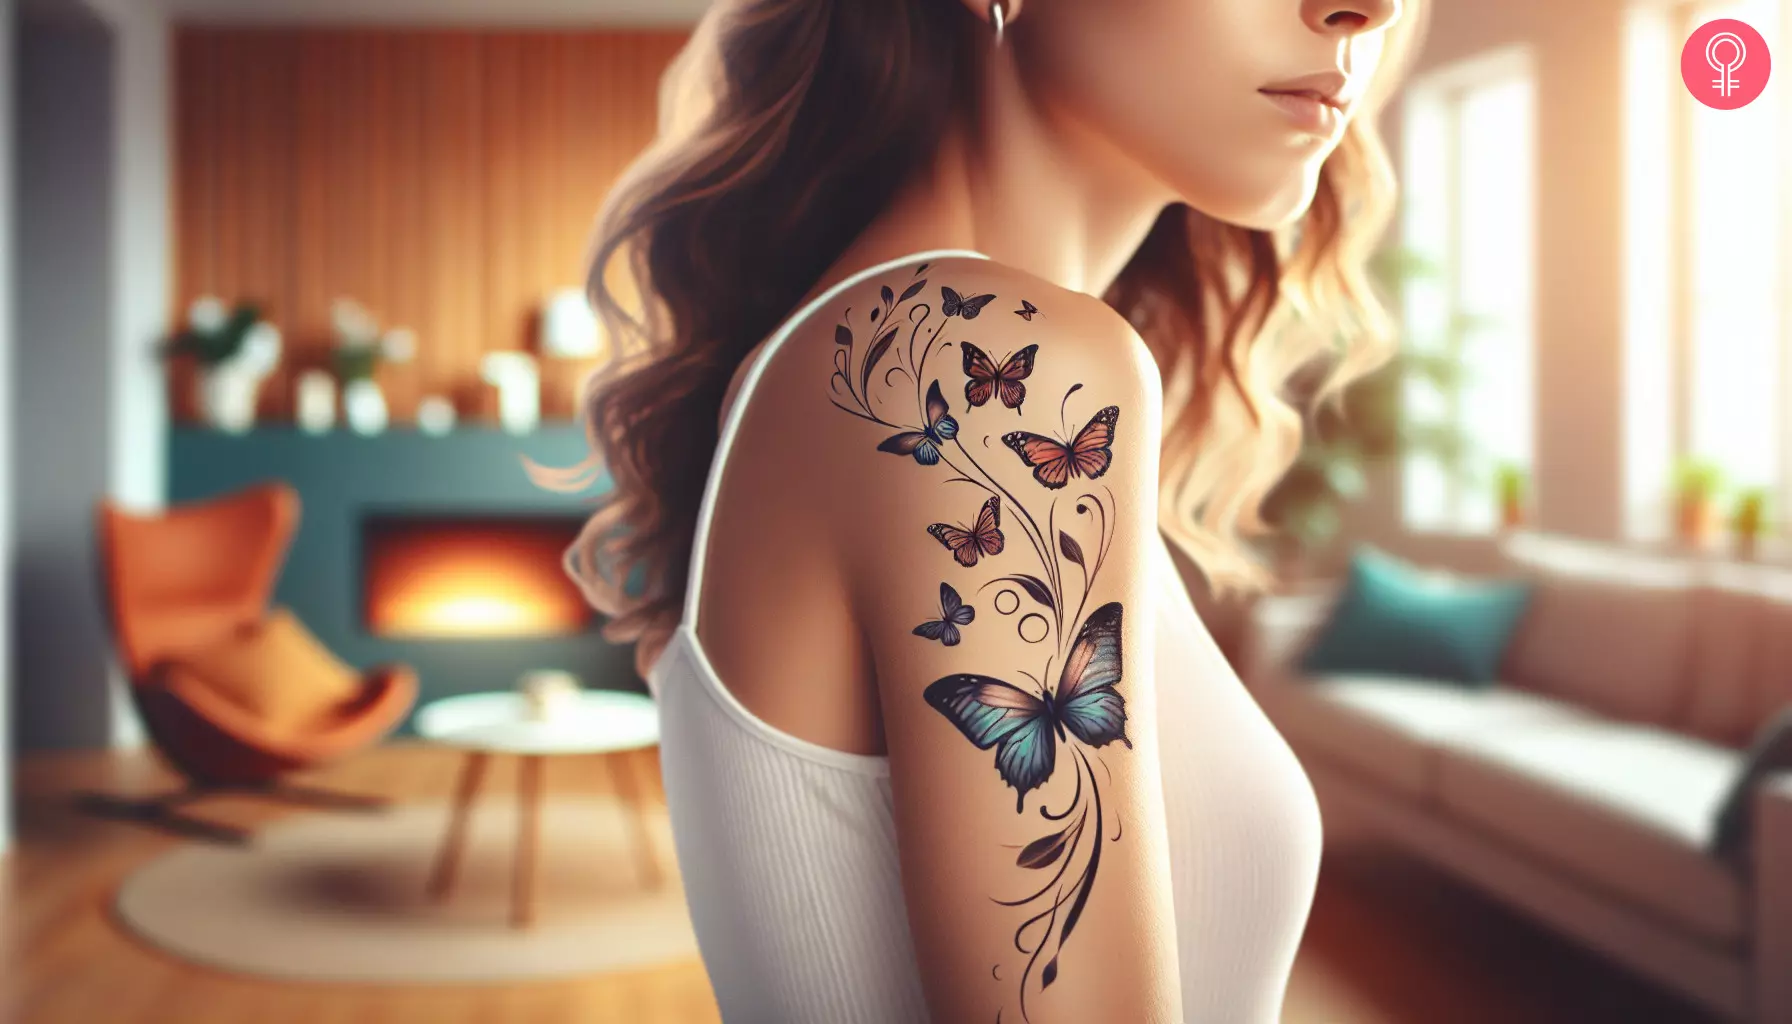 A woman with flying butterflies freedom tattoo on her arm